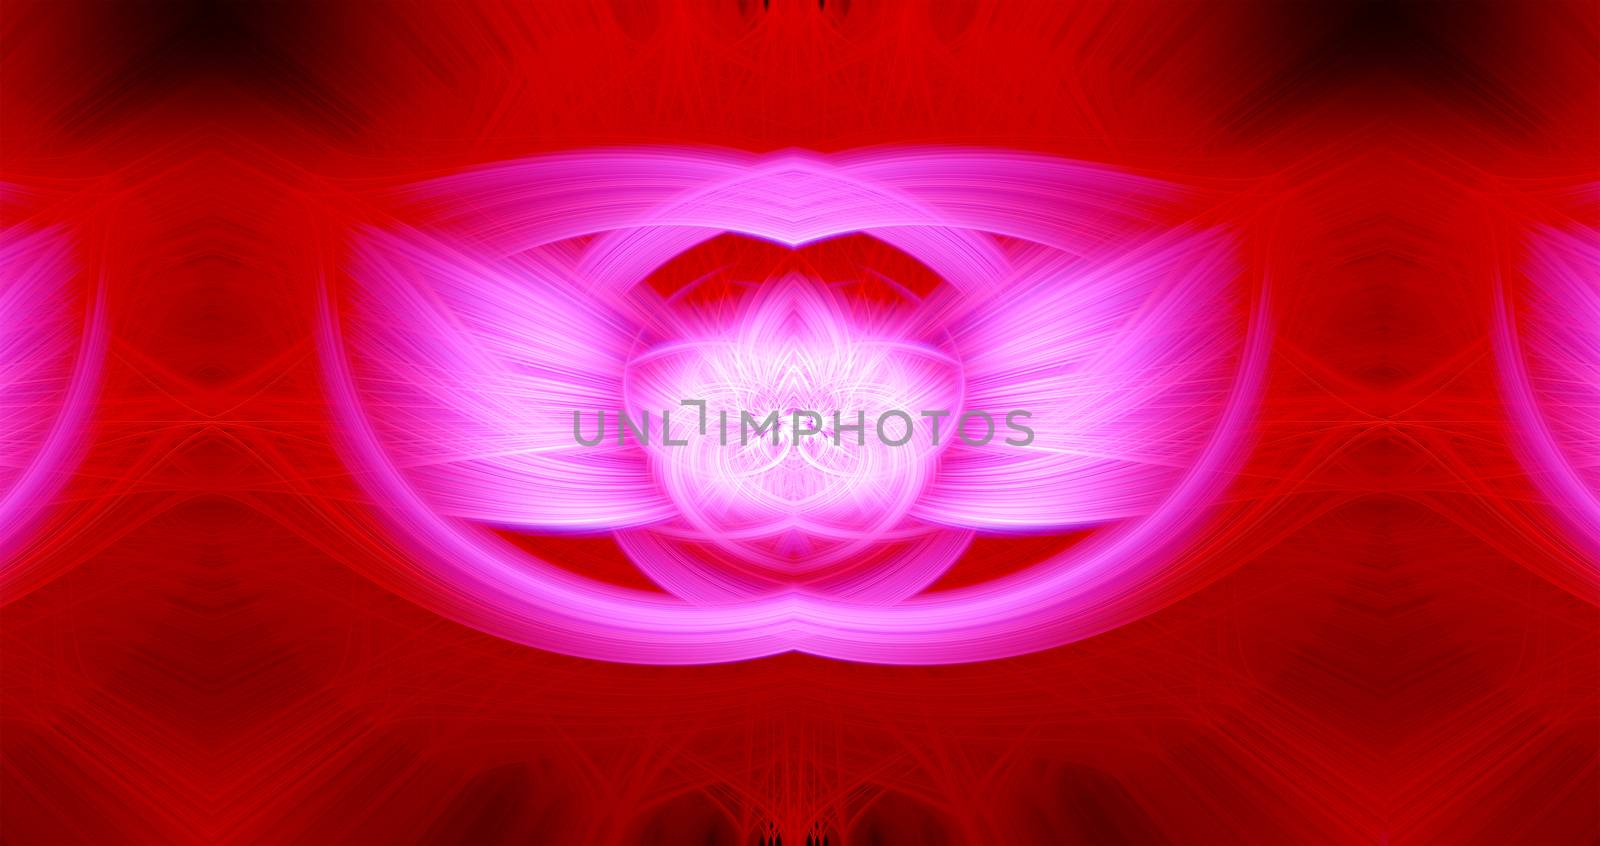 Beautiful abstract intertwined glowing 3d fibers forming a shape of sparkle, flame, flower, interlinked hearts. Maroon, white, red, and pink colors. Banner size. Illustration by DamantisZ